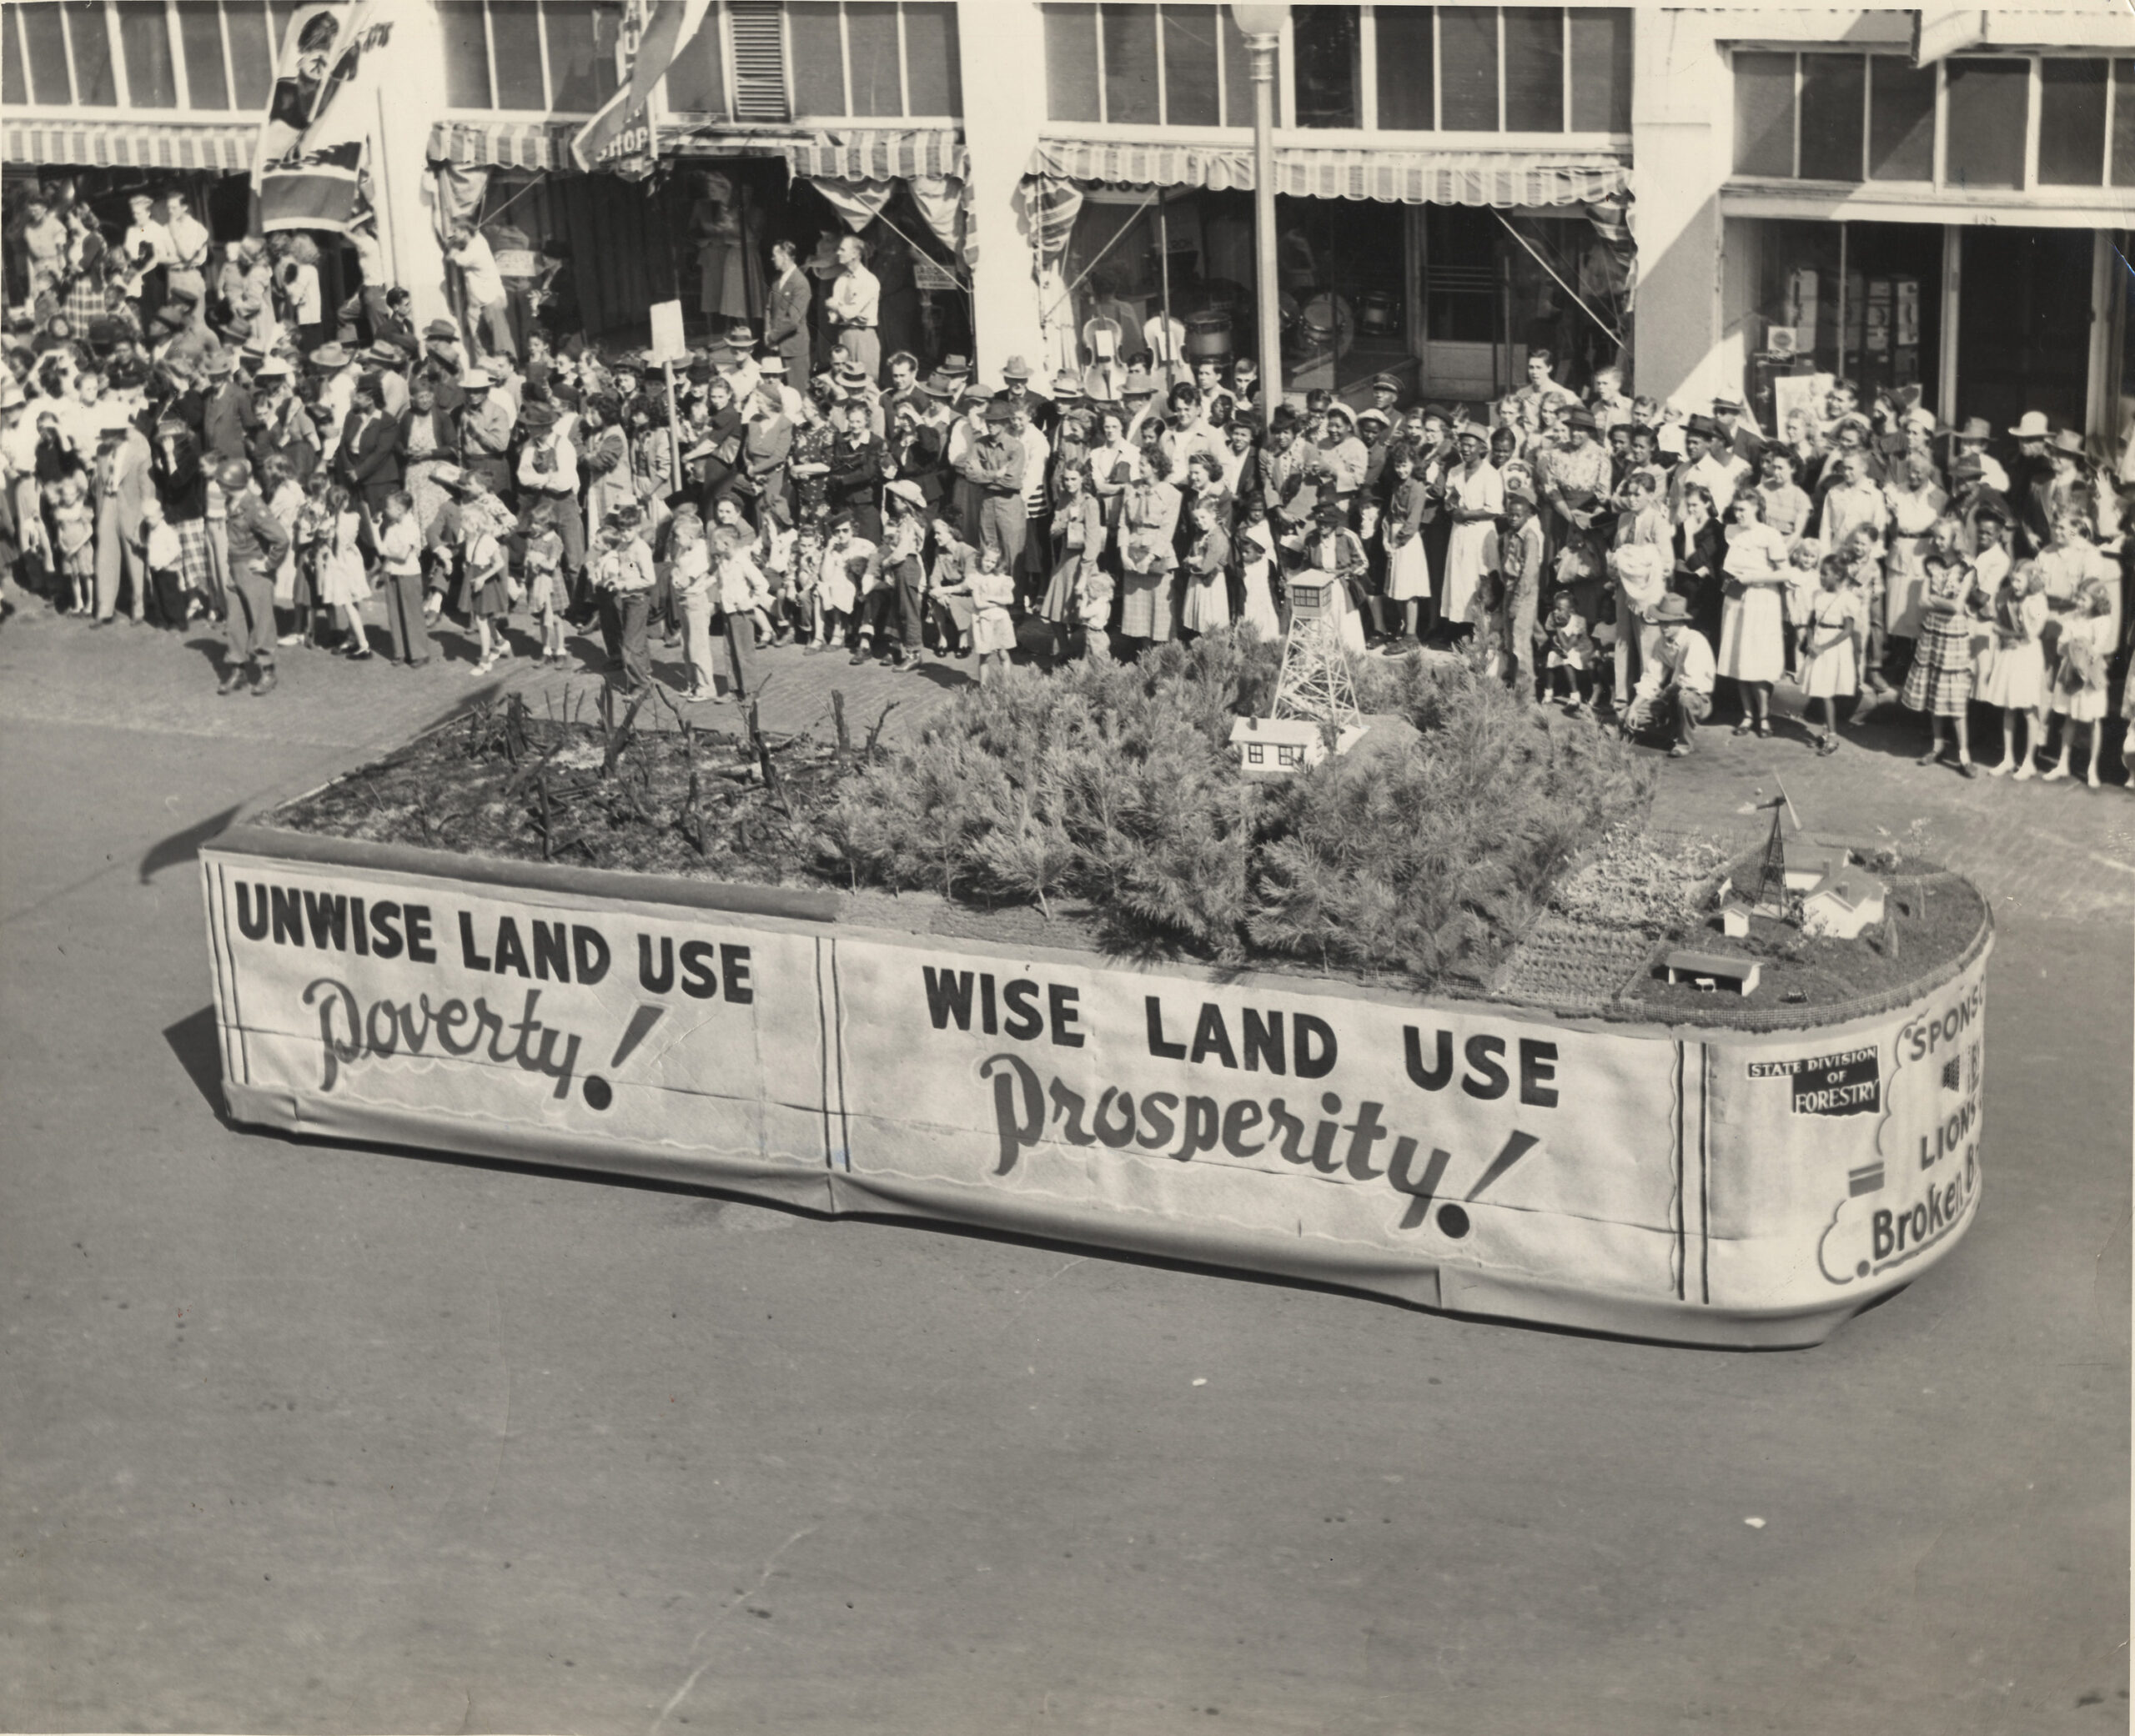 Historical image of Oklahoma Forestry Services parade float